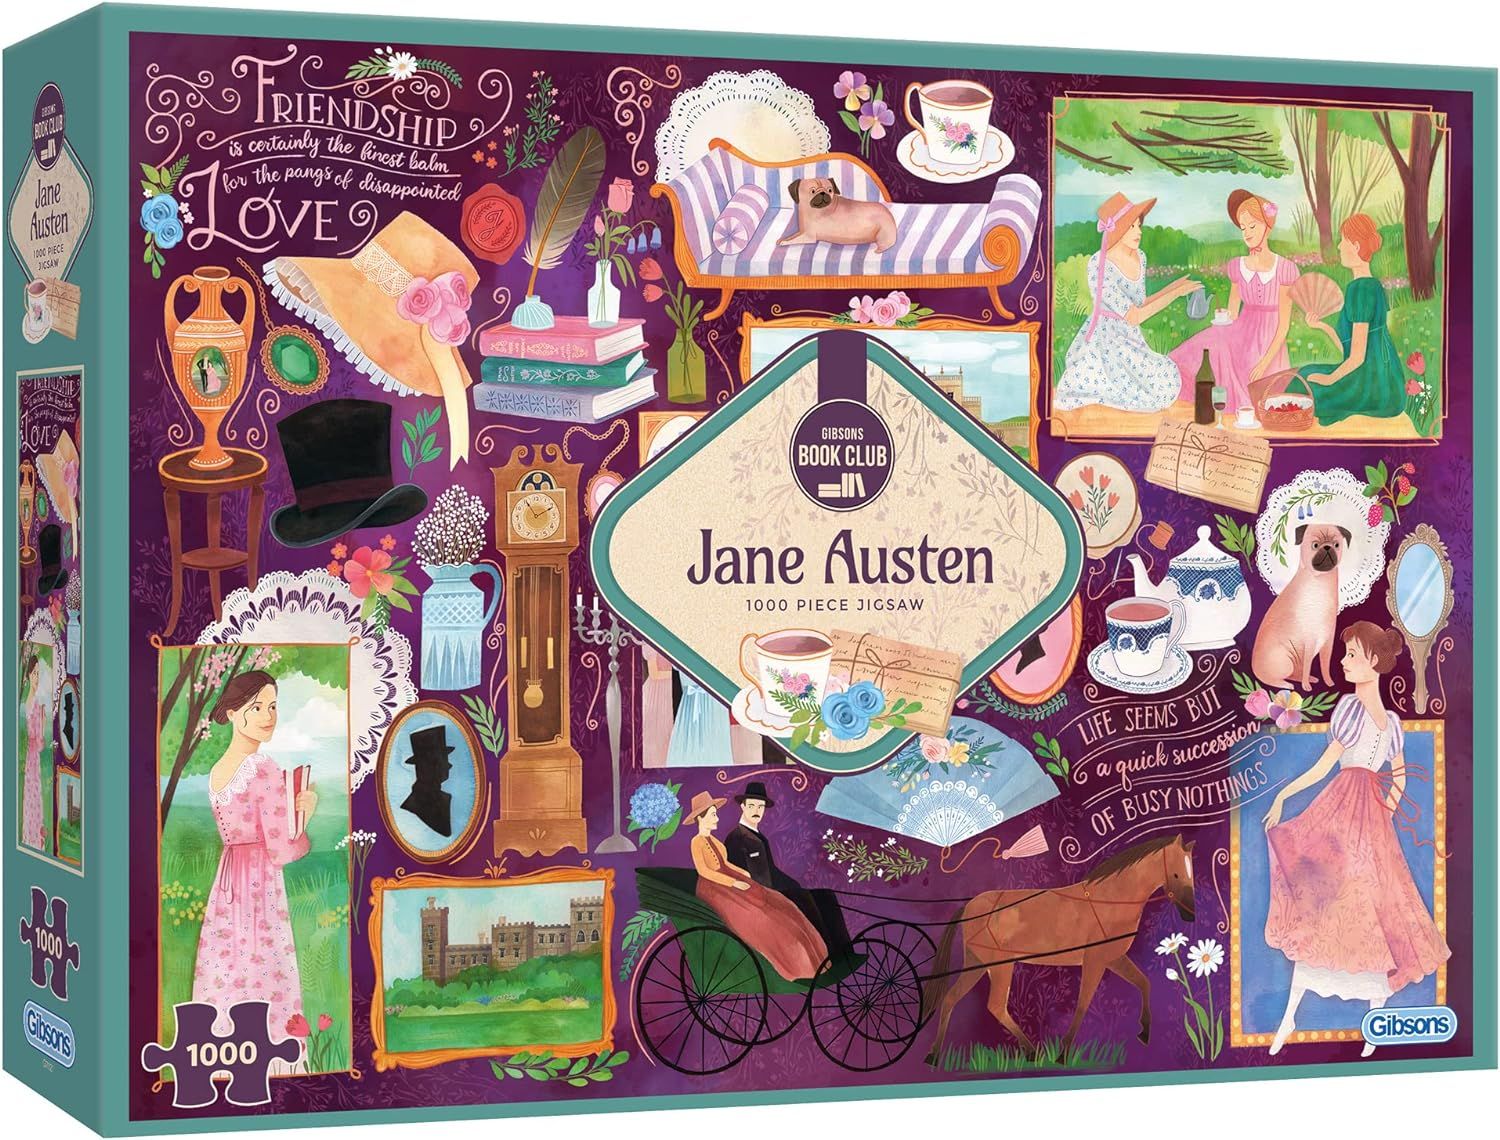 Image of a Jane Austen themed puzzle.